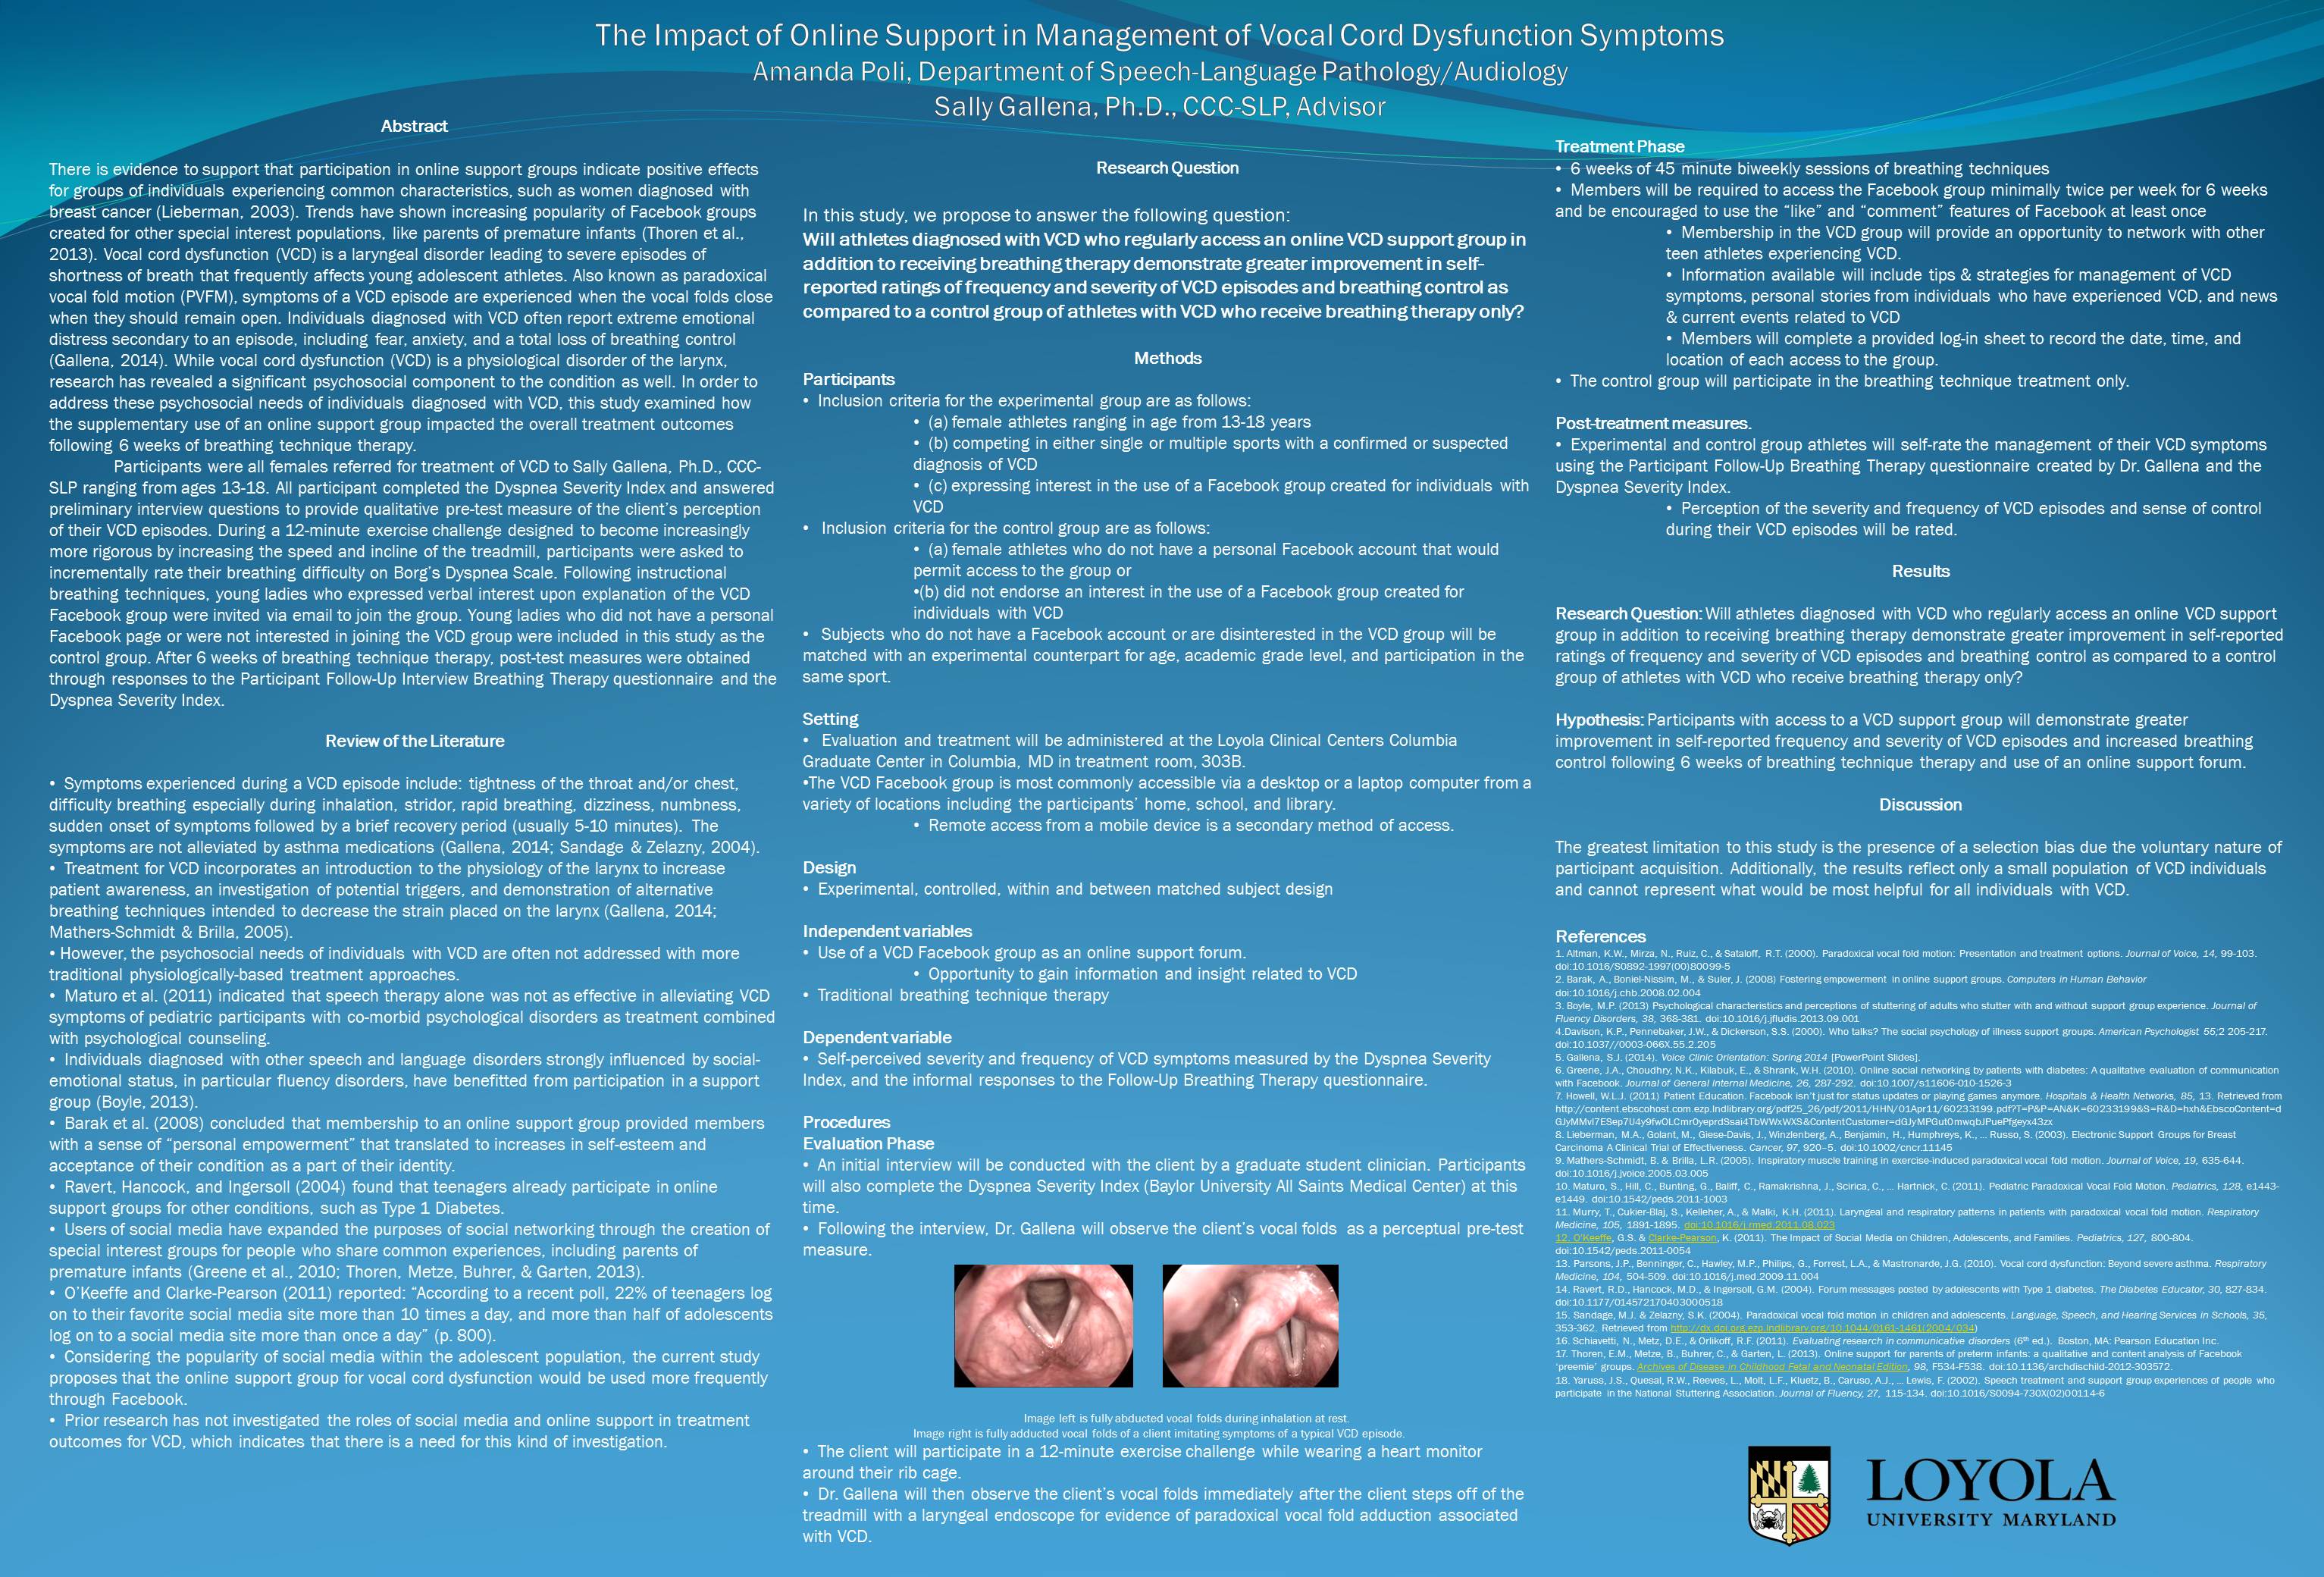 poster image: 'The Impact of Online Support in Management of Vocal Cord Dysfunction Symptoms'